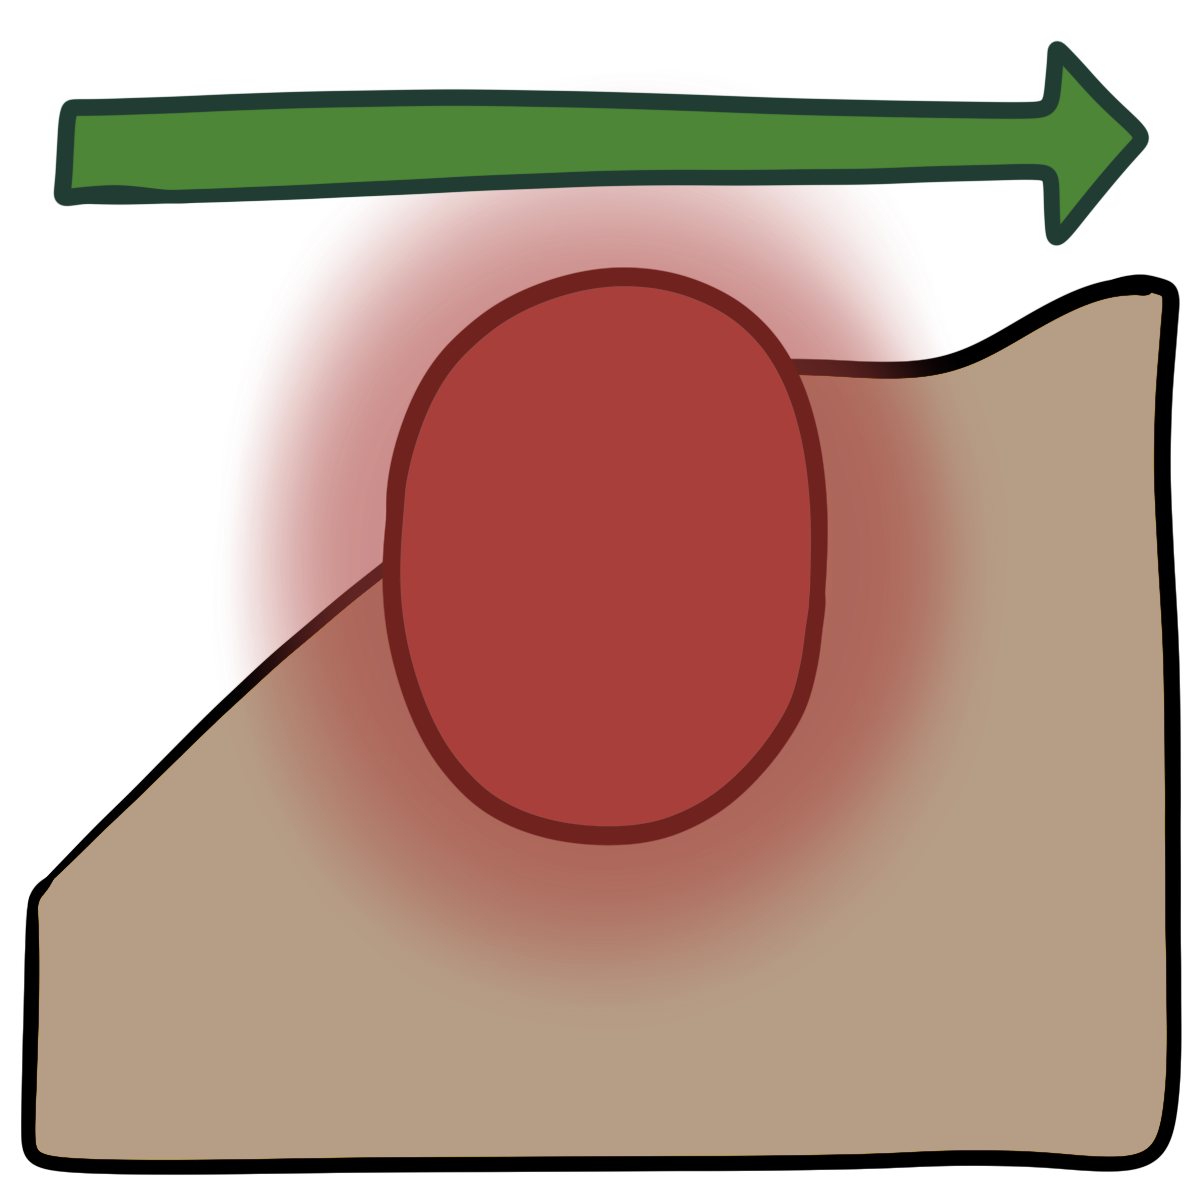 A thin green arrow pointing right above a glowing red oval. Curved beige skin fills the bottom half of the background.